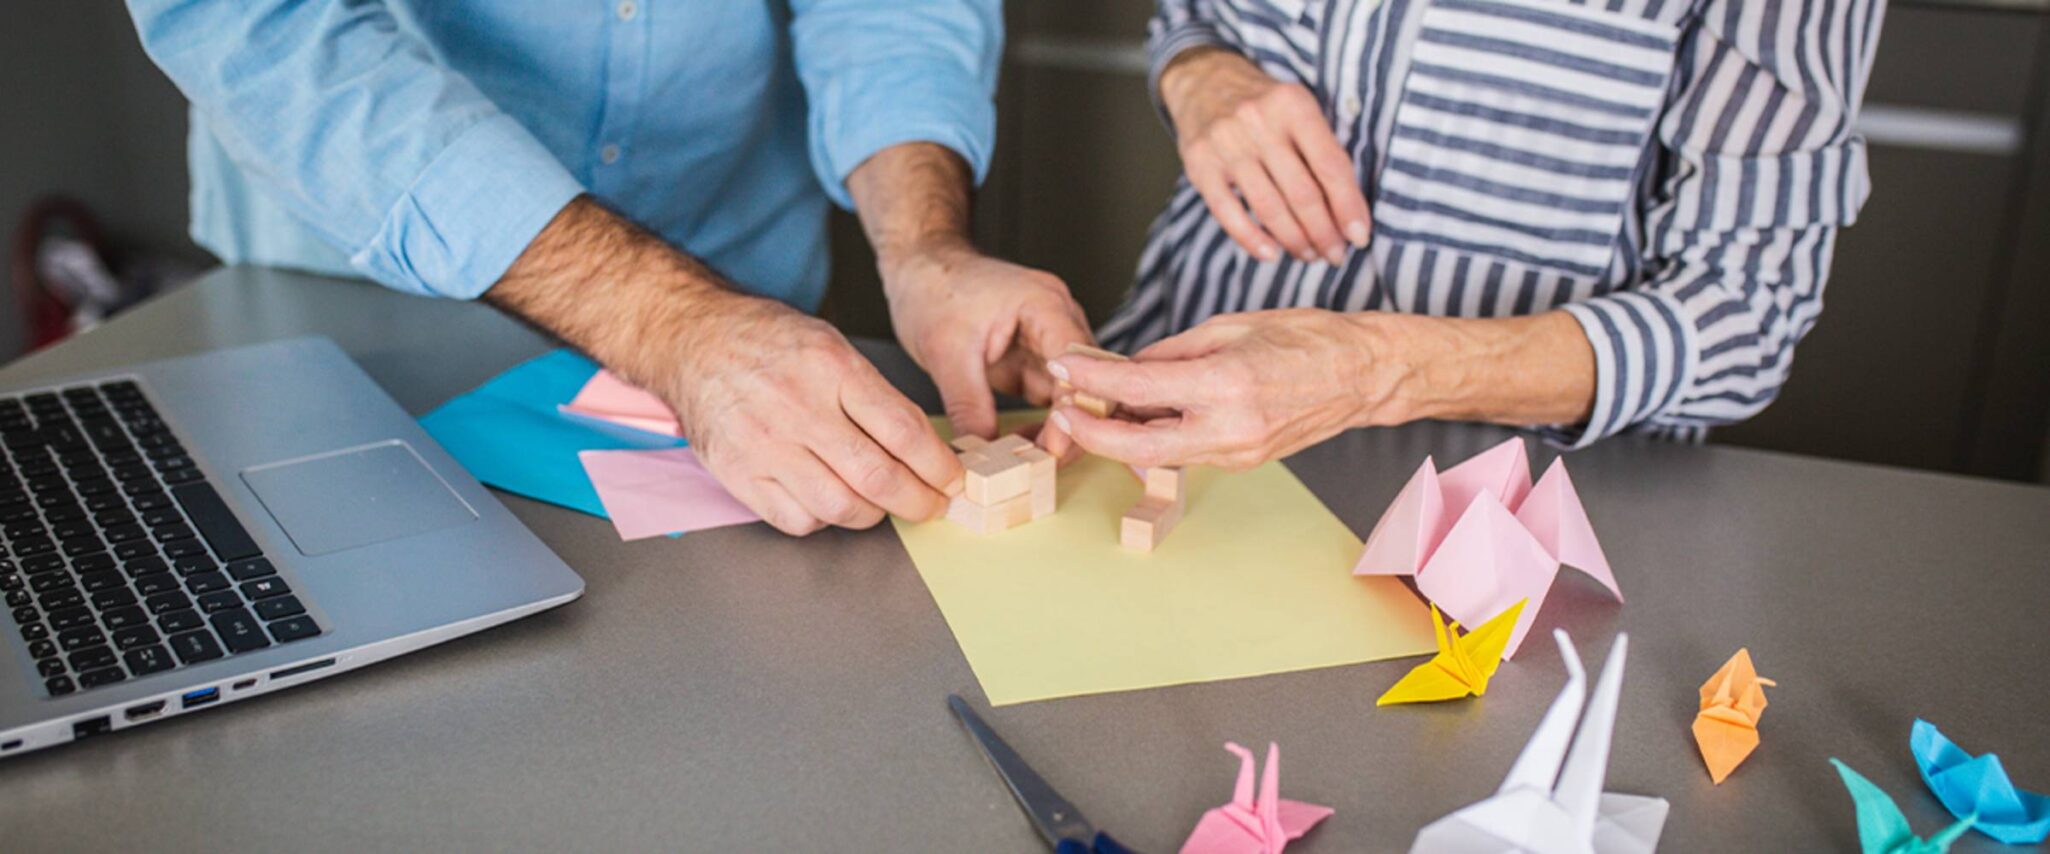 Two elderly people doing paper crafts at their retirement community